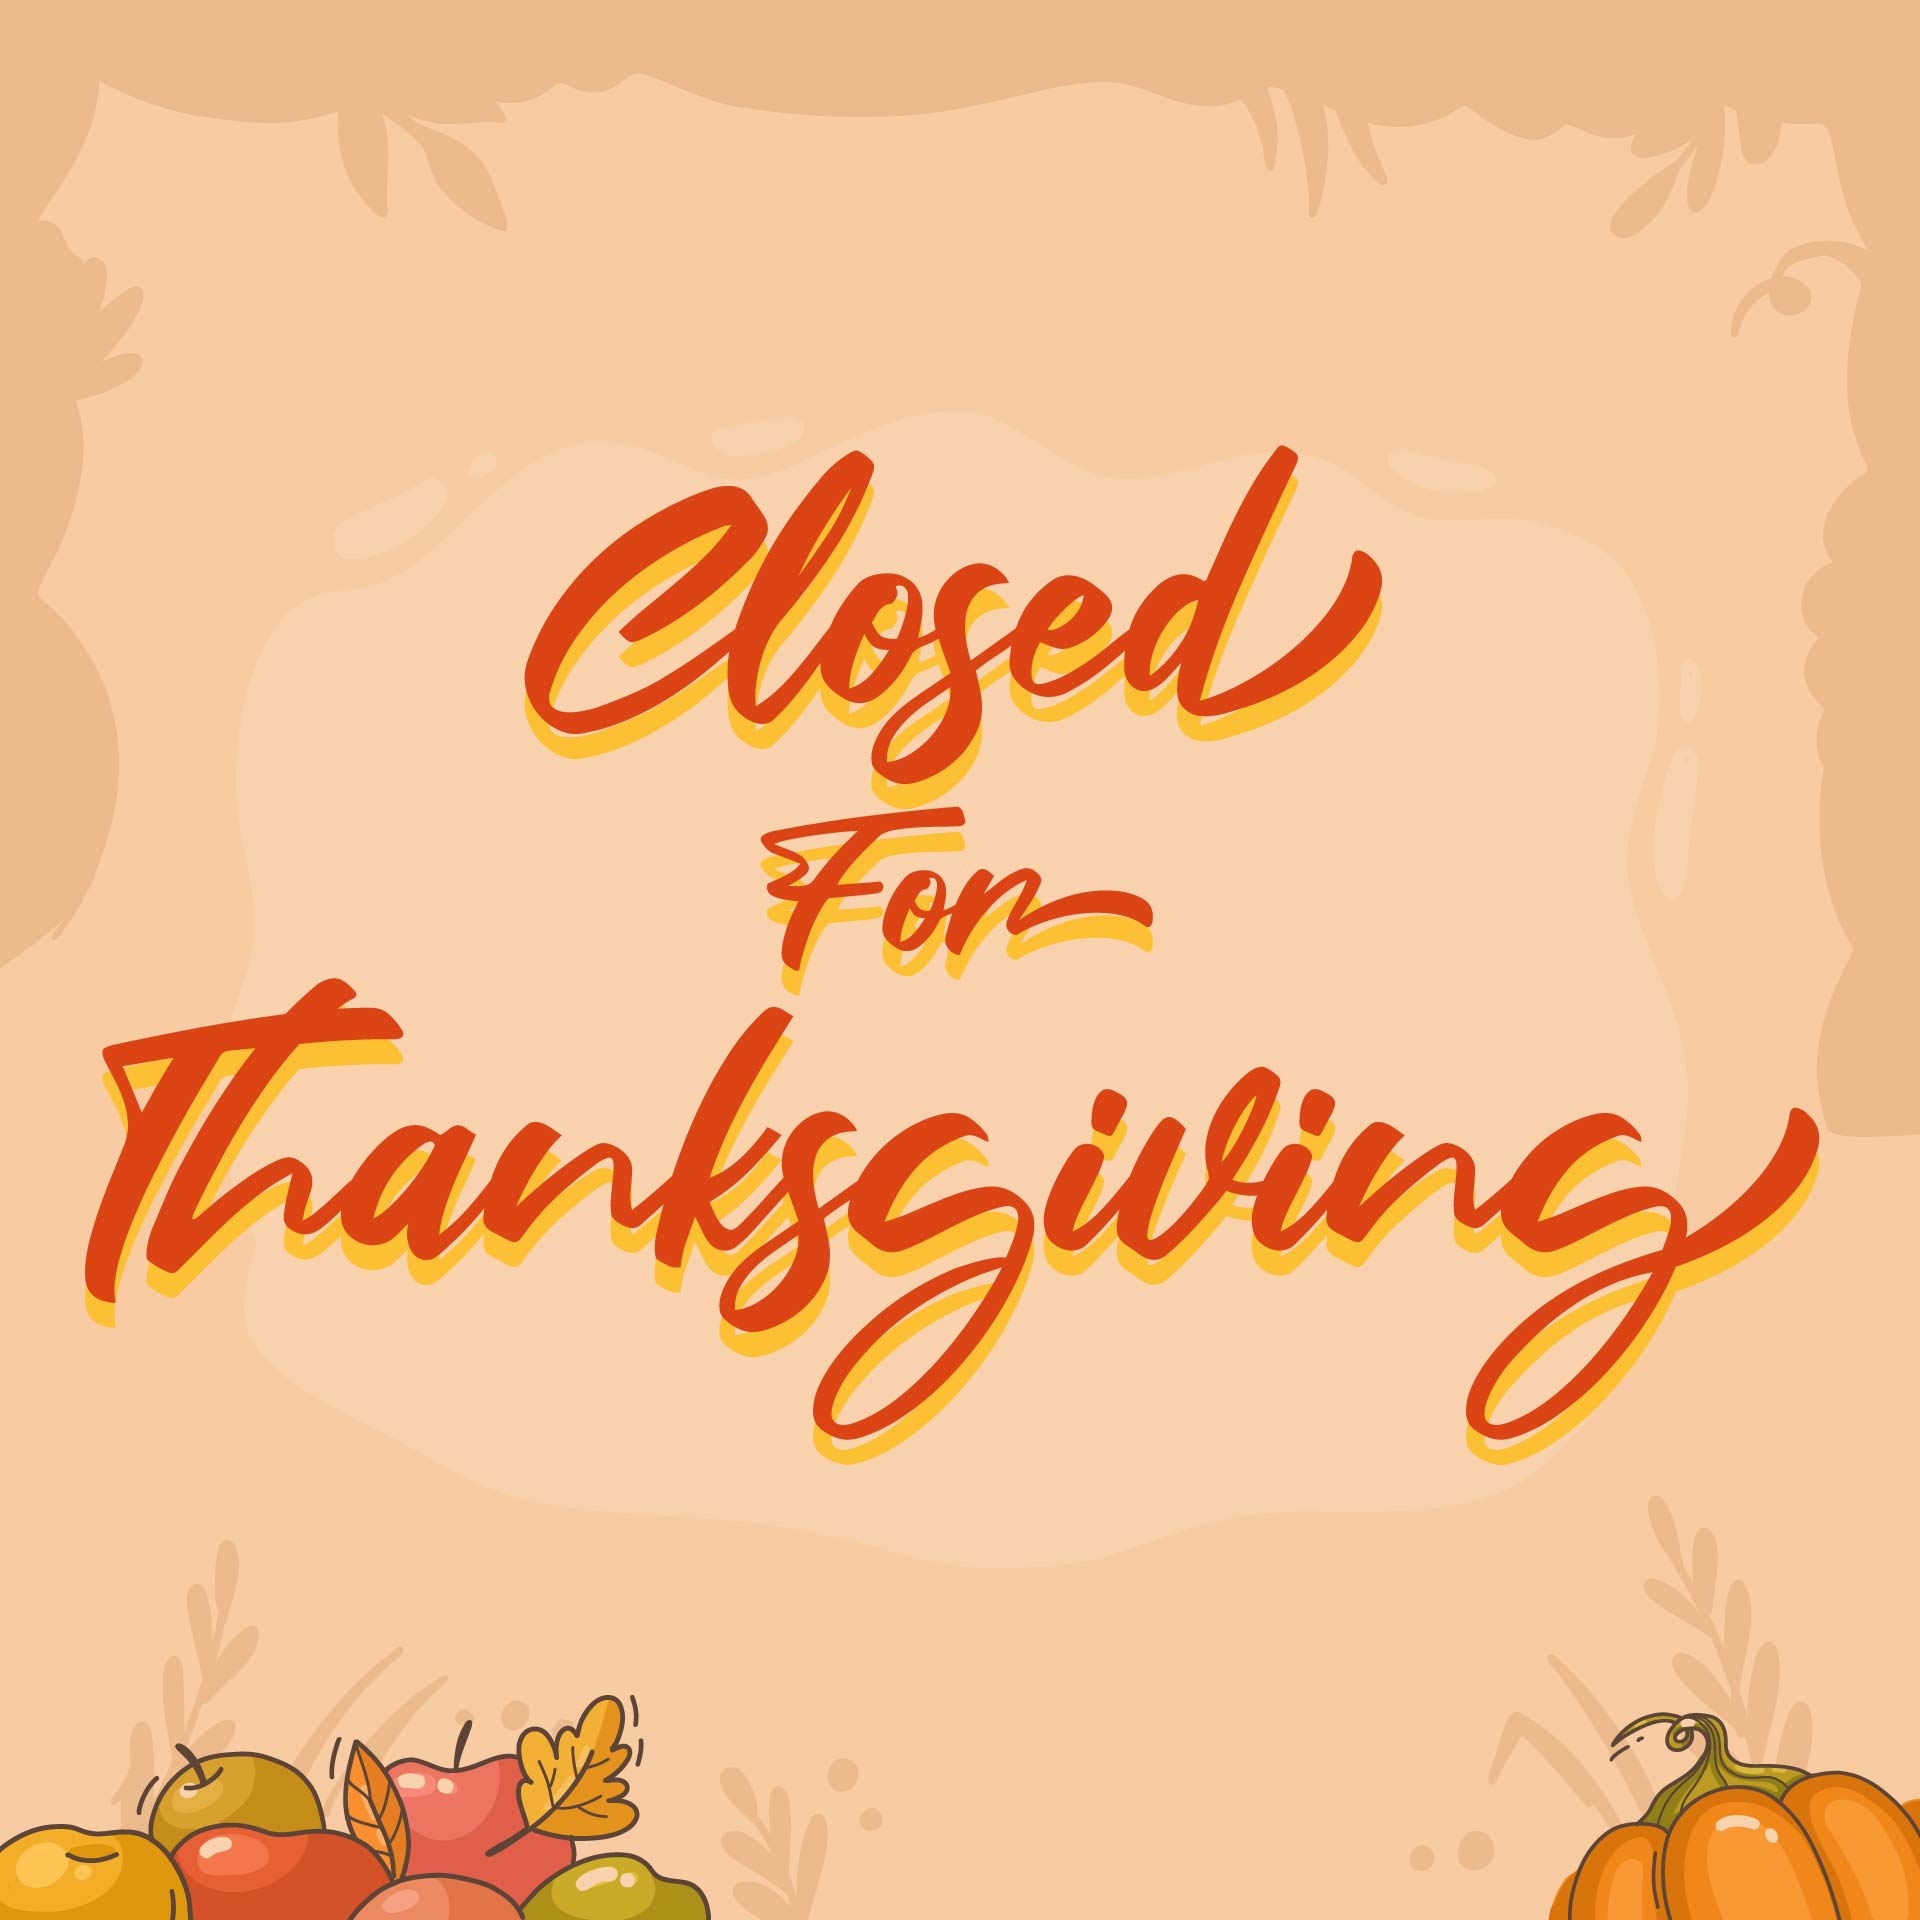 We Will Be Closed On Thanksgiving Sign Printables